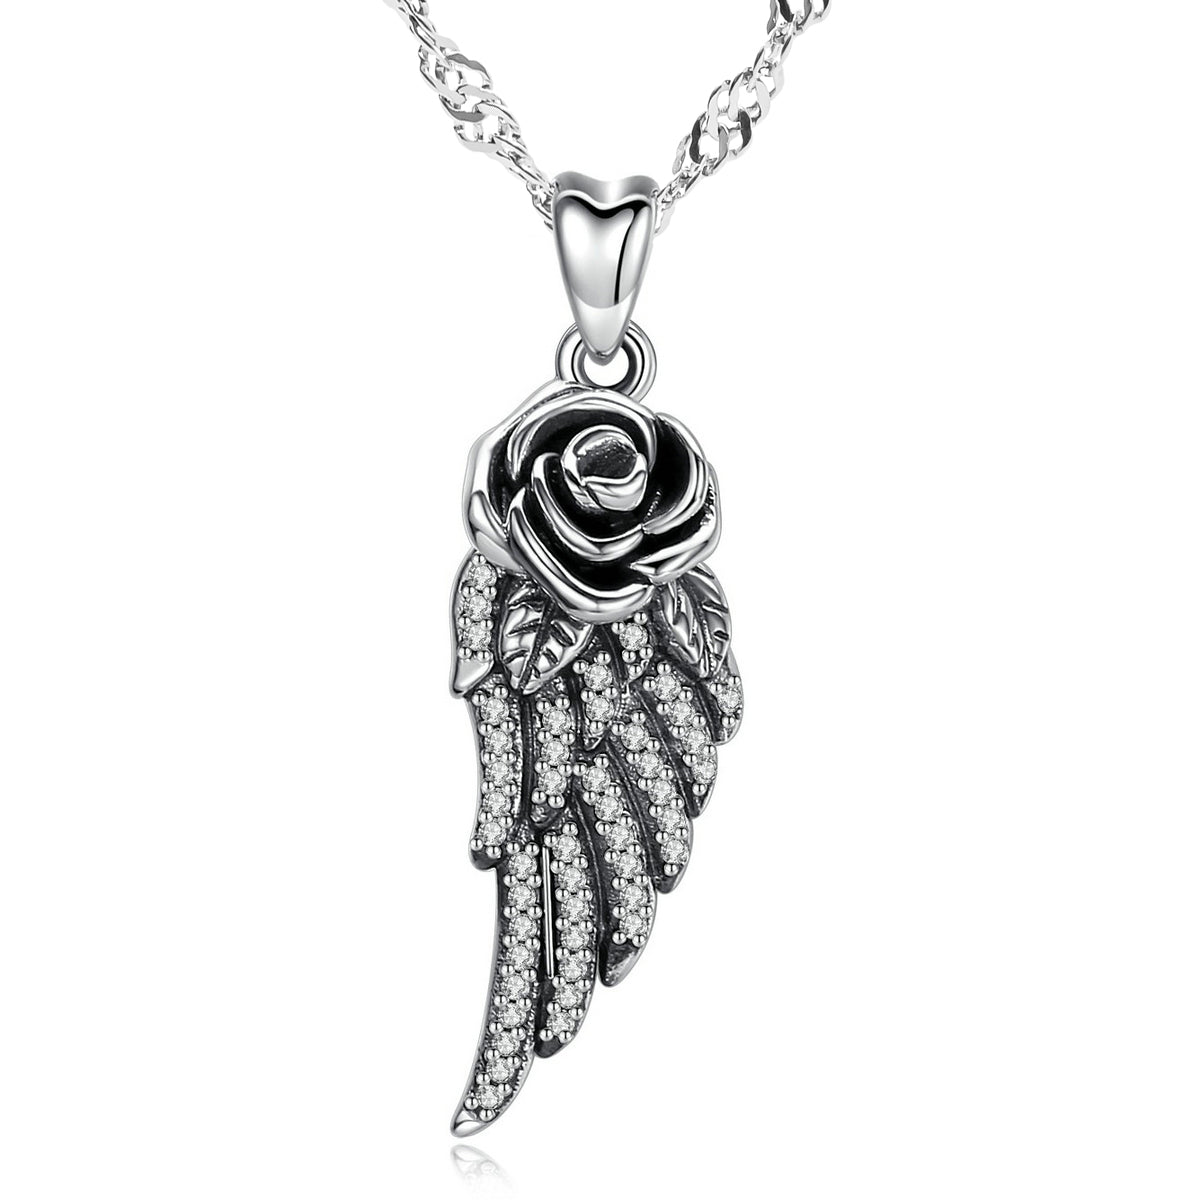 Rose Angel Wing Crystal pendant with 925 Sterling Silver Water Wave necklace chain 18"